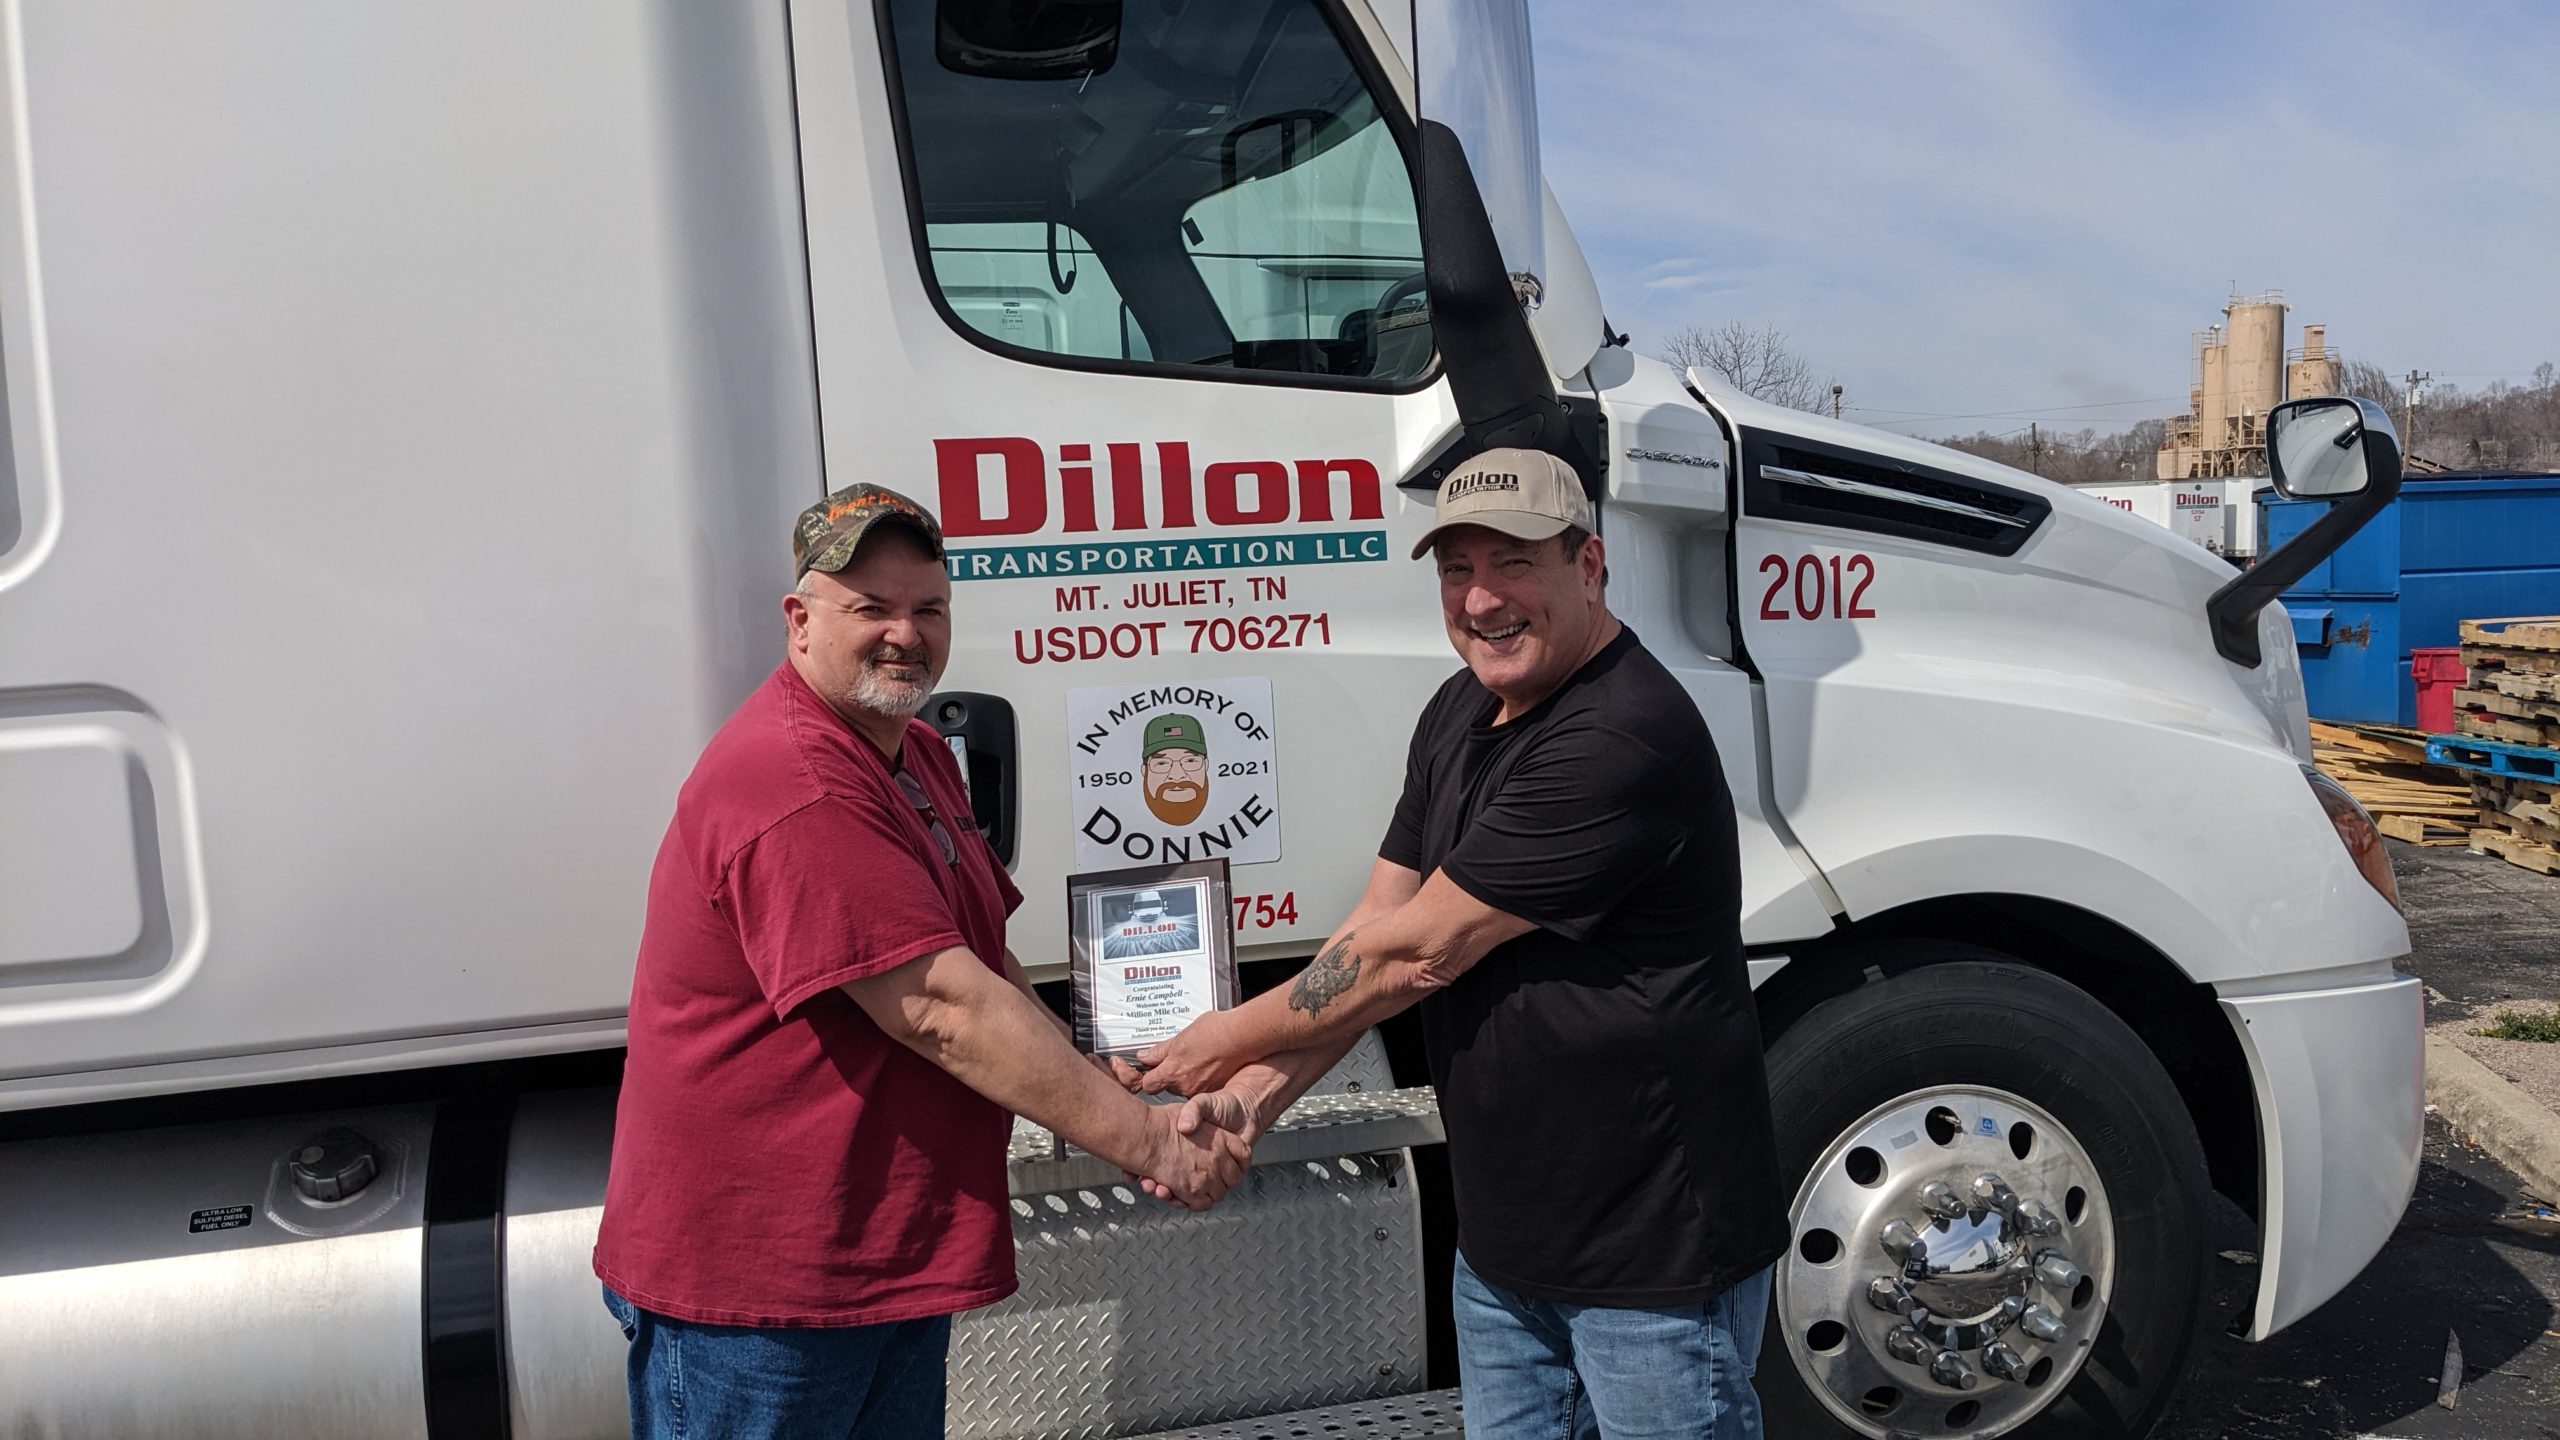 Ernie Campbell receiving his induction into Dillon Transportation's Million Mile Club.